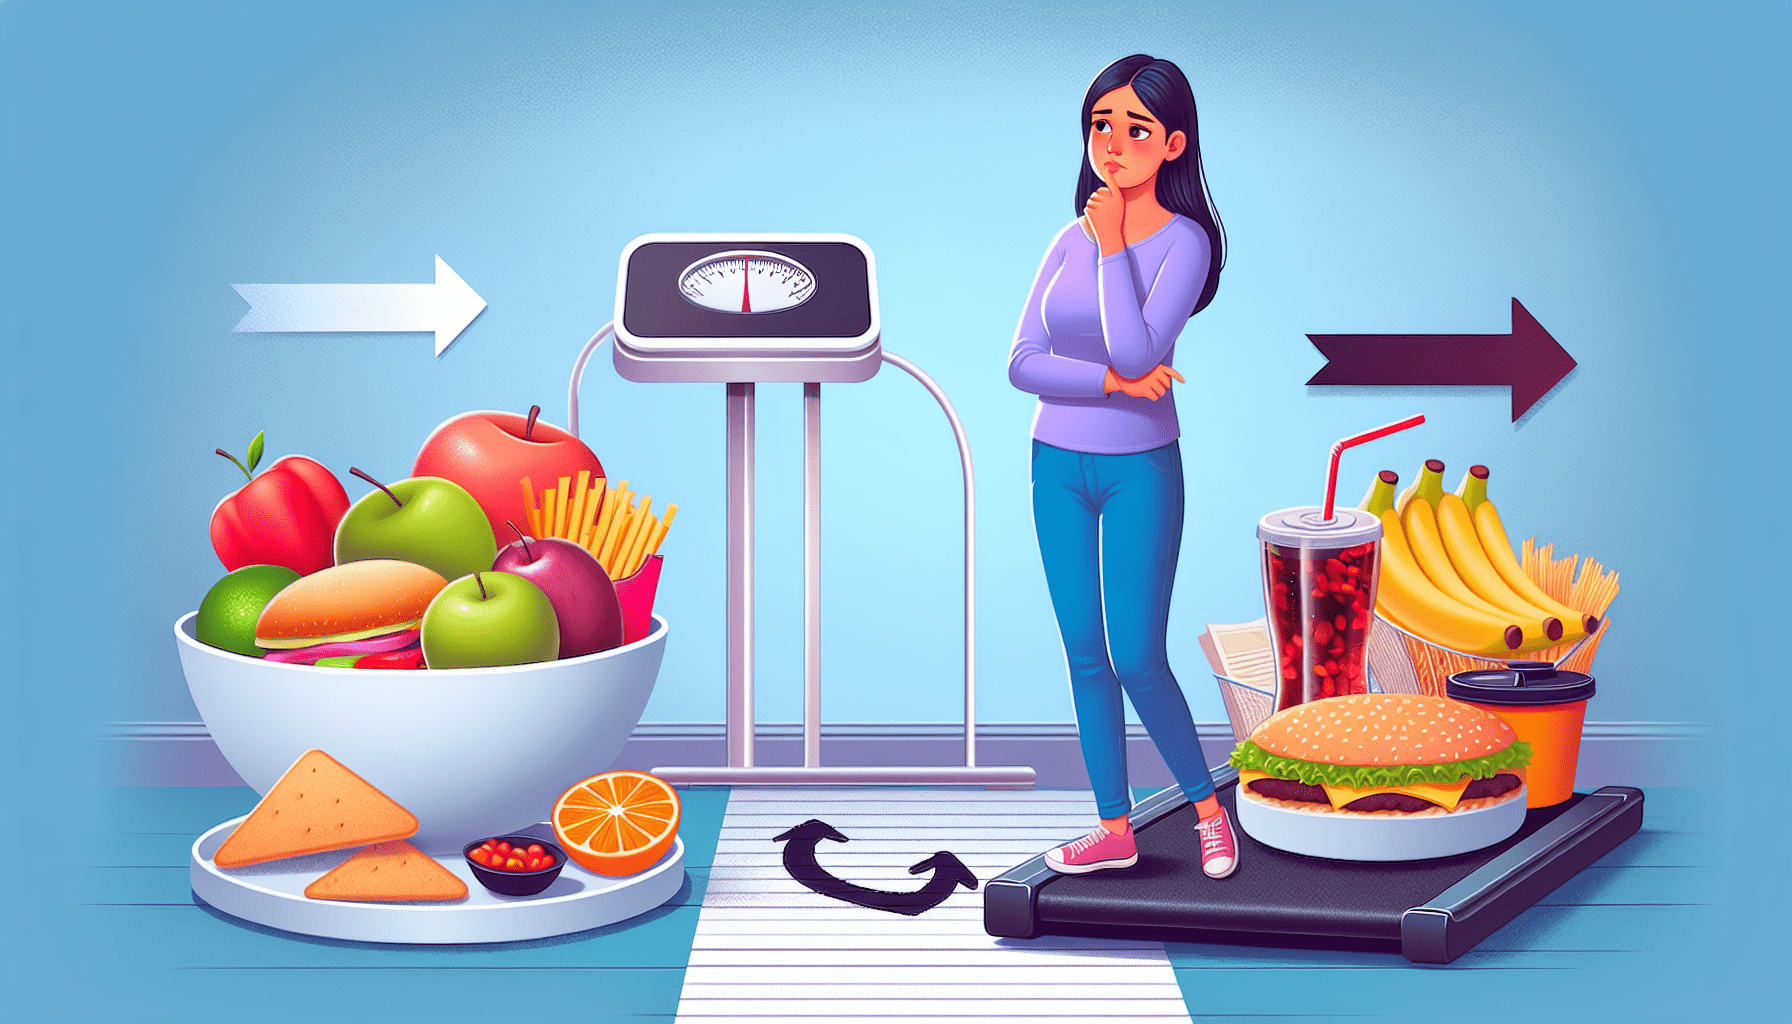 What Things To Avoid For Weight Loss?